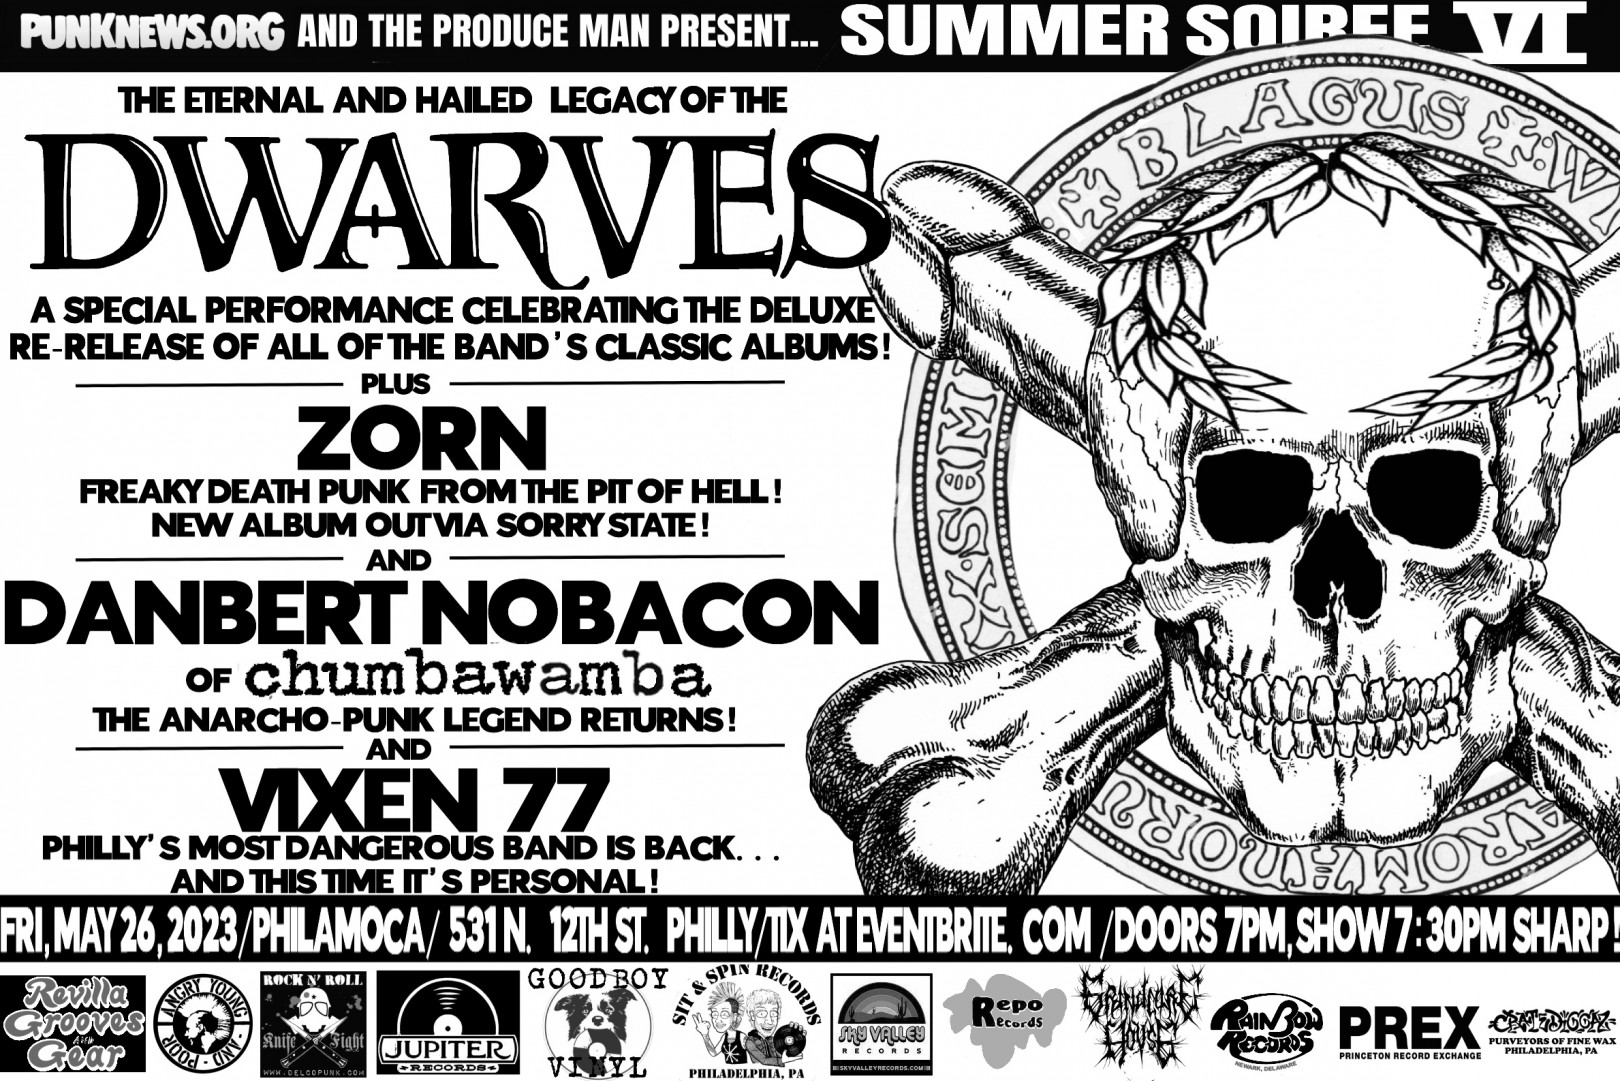 Summer Soiree VI with Dwarves, Danbert, Zorn, Vixen77 is 40% sold out...